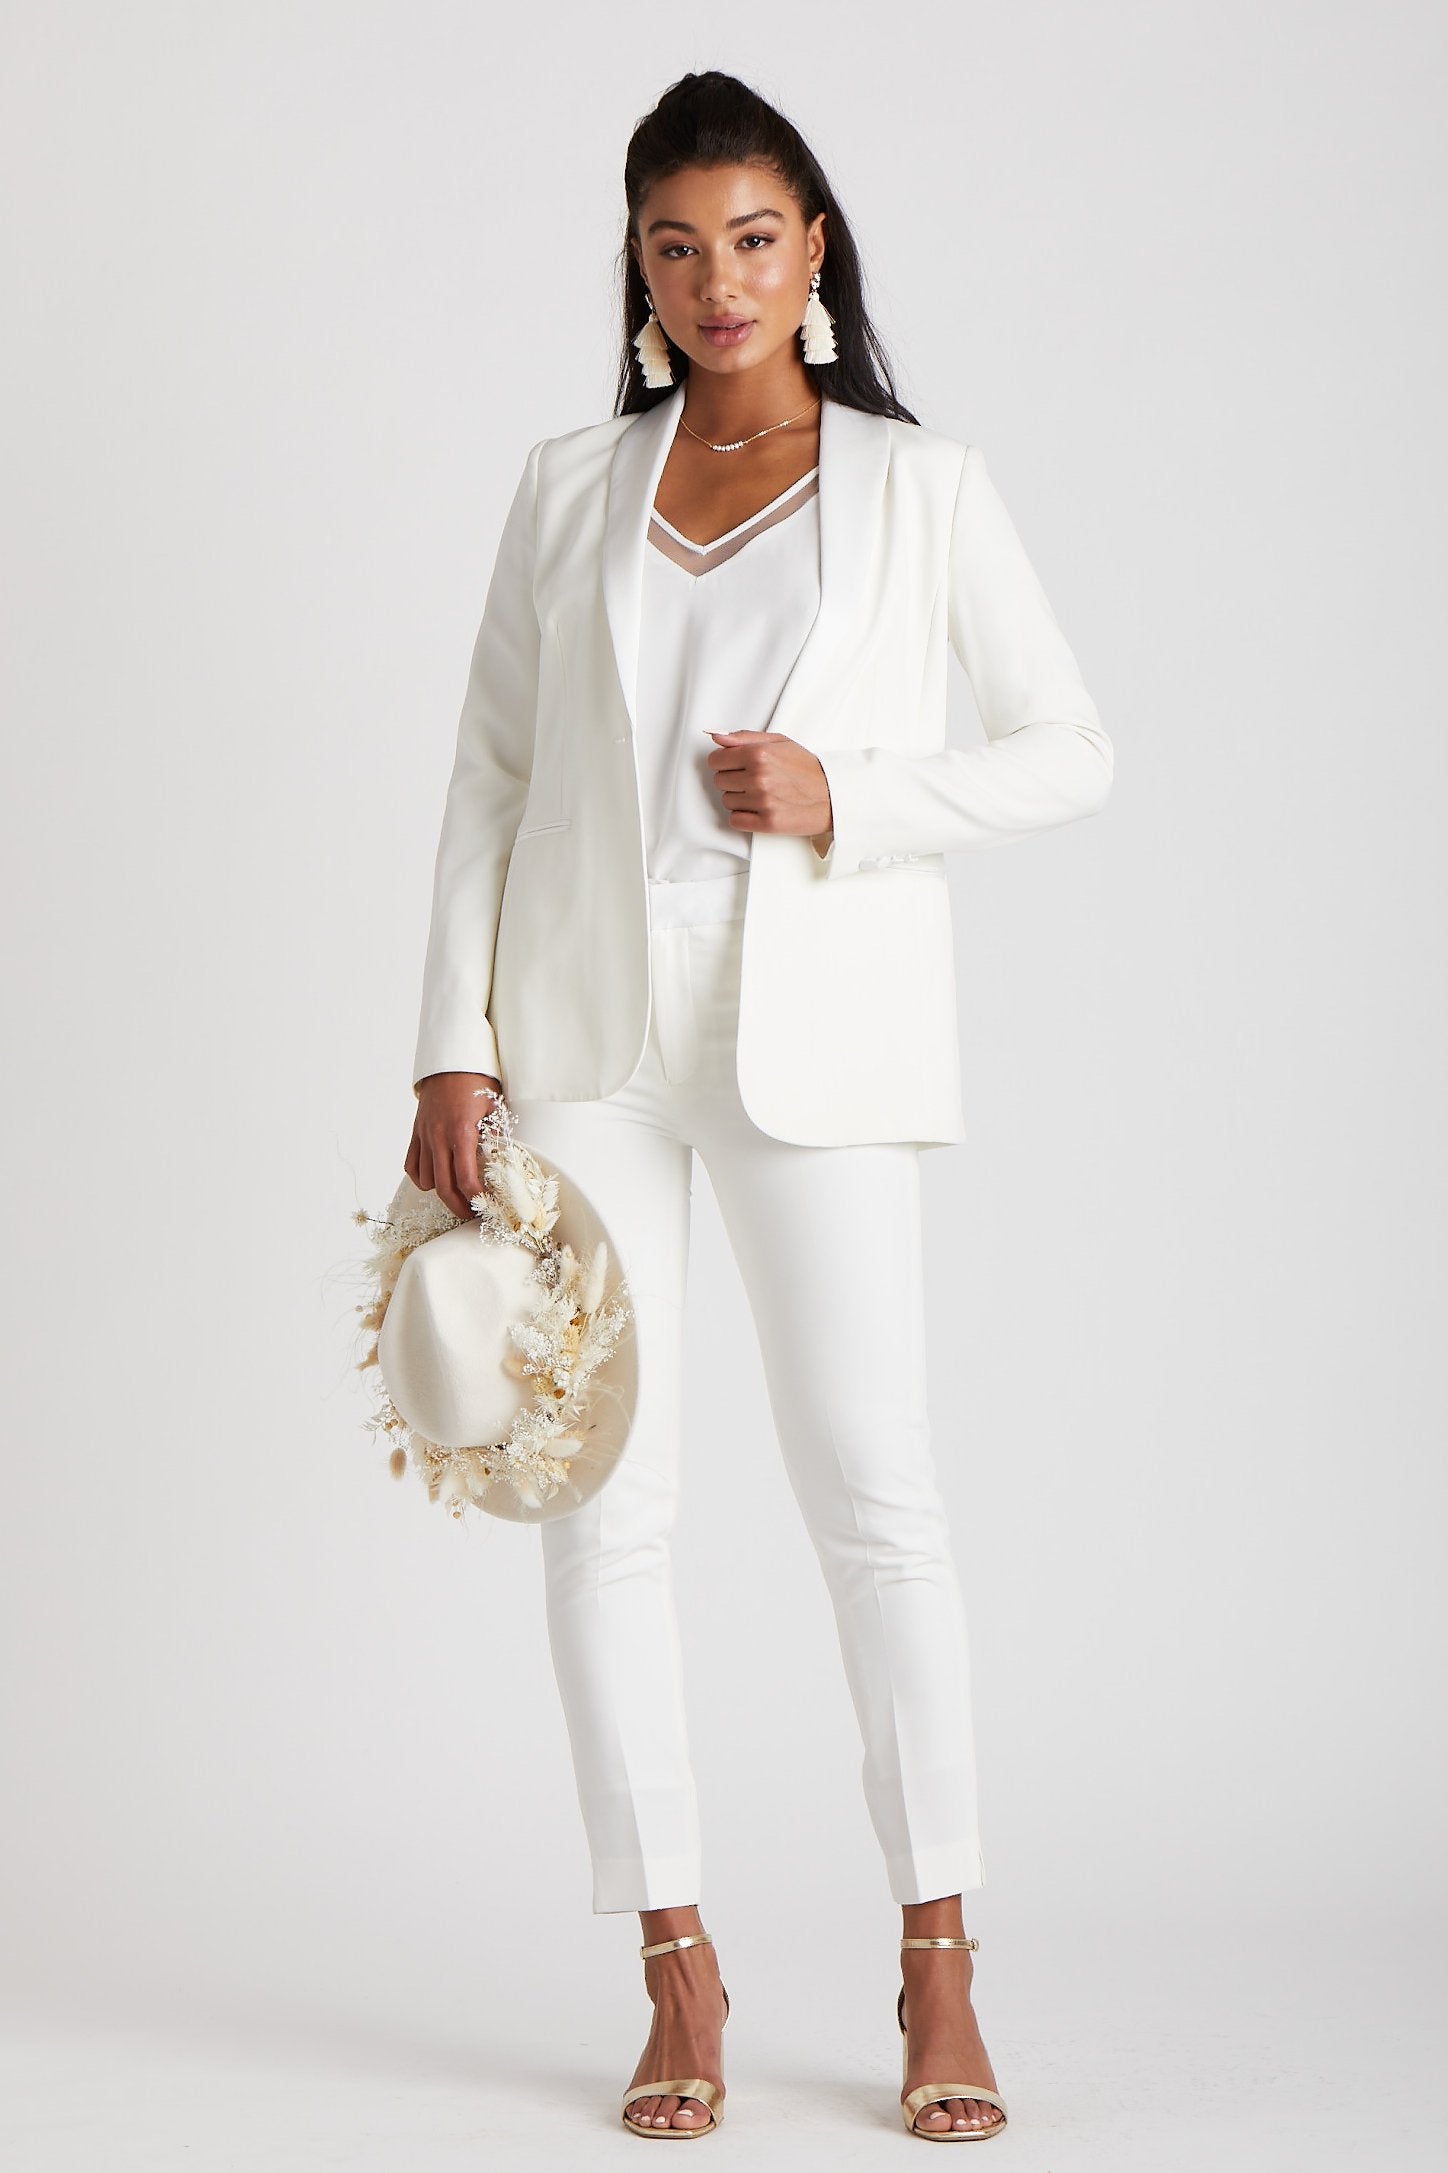 Women's White Tuxedo by SuitShop, front view